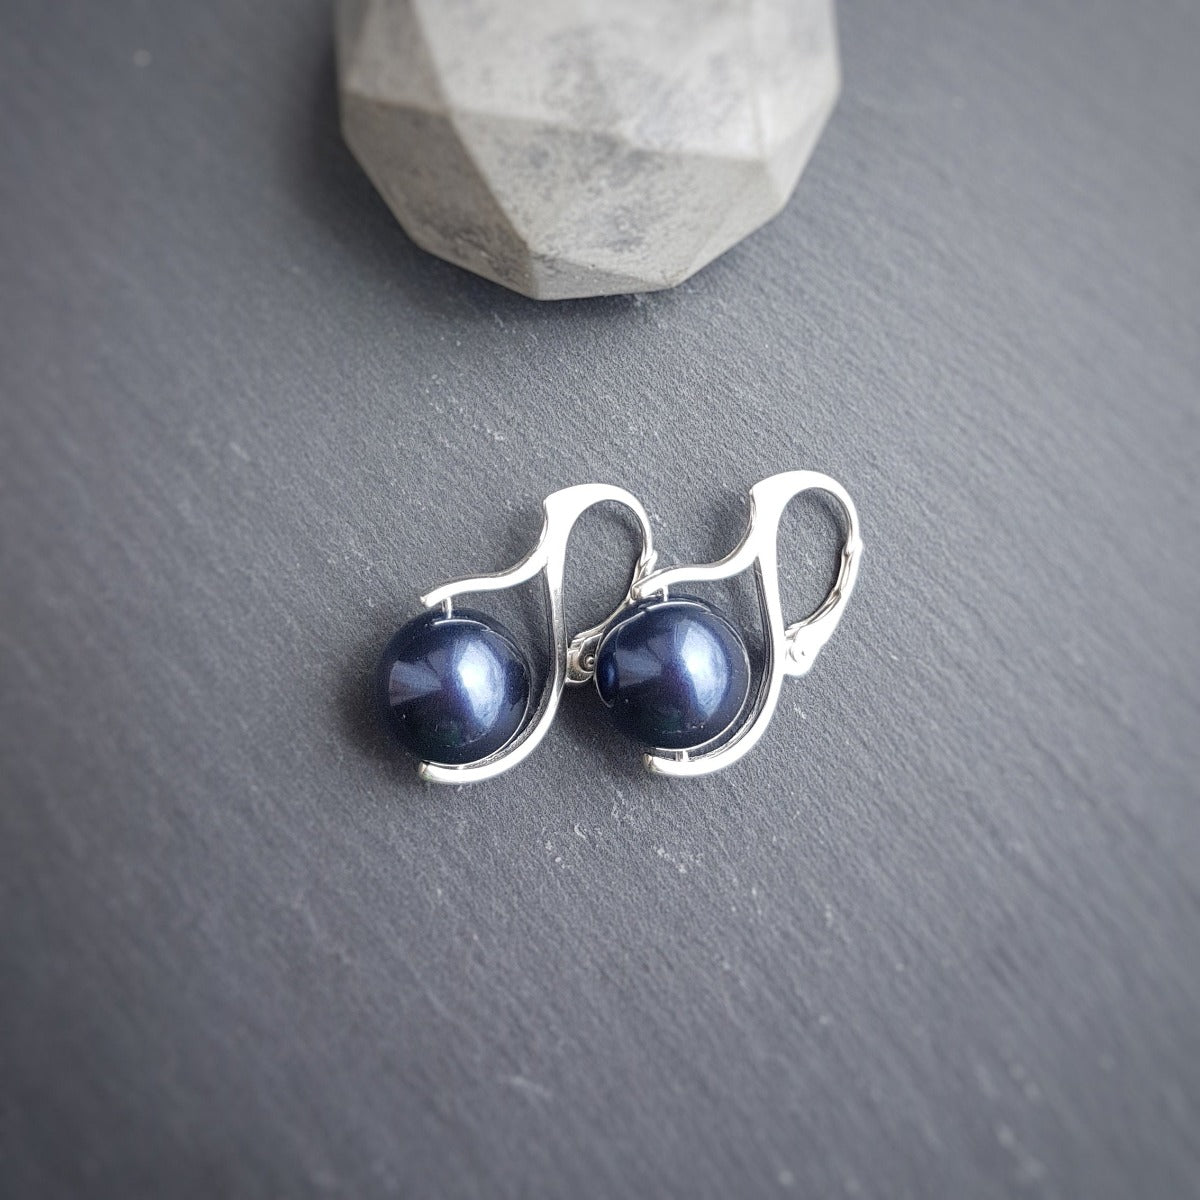 Crystal Pearl Luster Earrings in Midnight Blue color, drop style, leverback fitting, by Magpie Gems Ireland